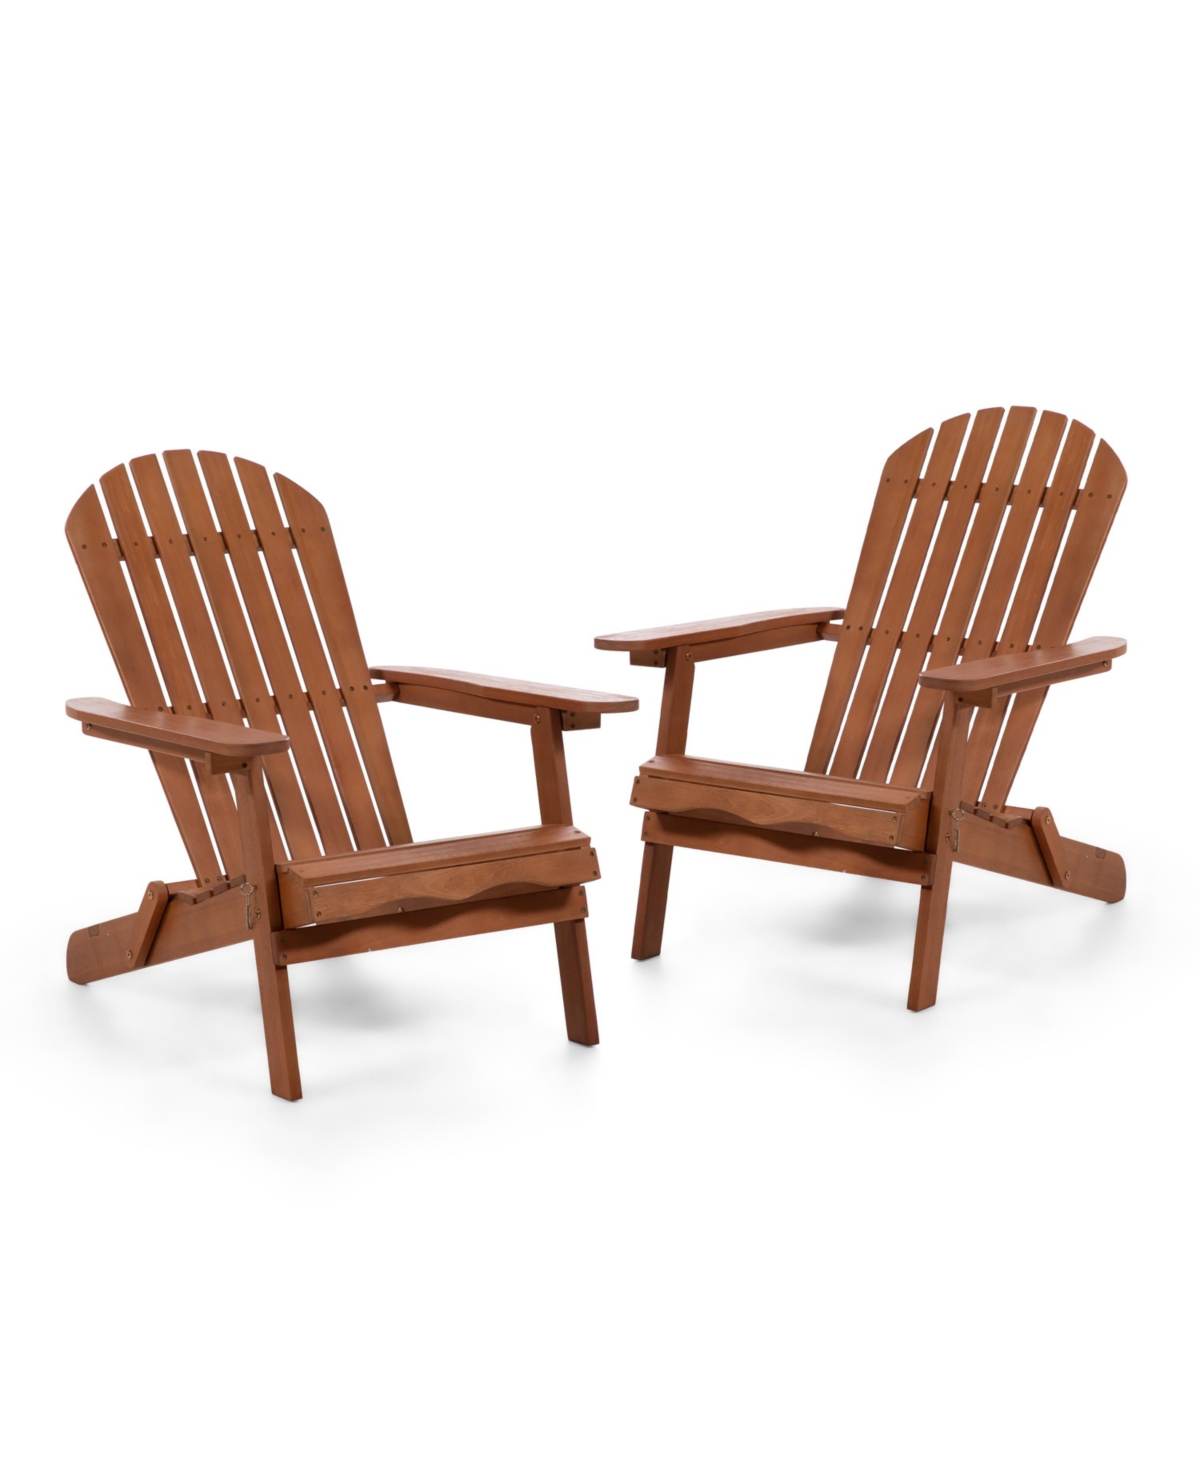 Furniture Of America 2 Piece Outdoor Eucalyptus Wood Folding Adirondrack Chairs In Natural